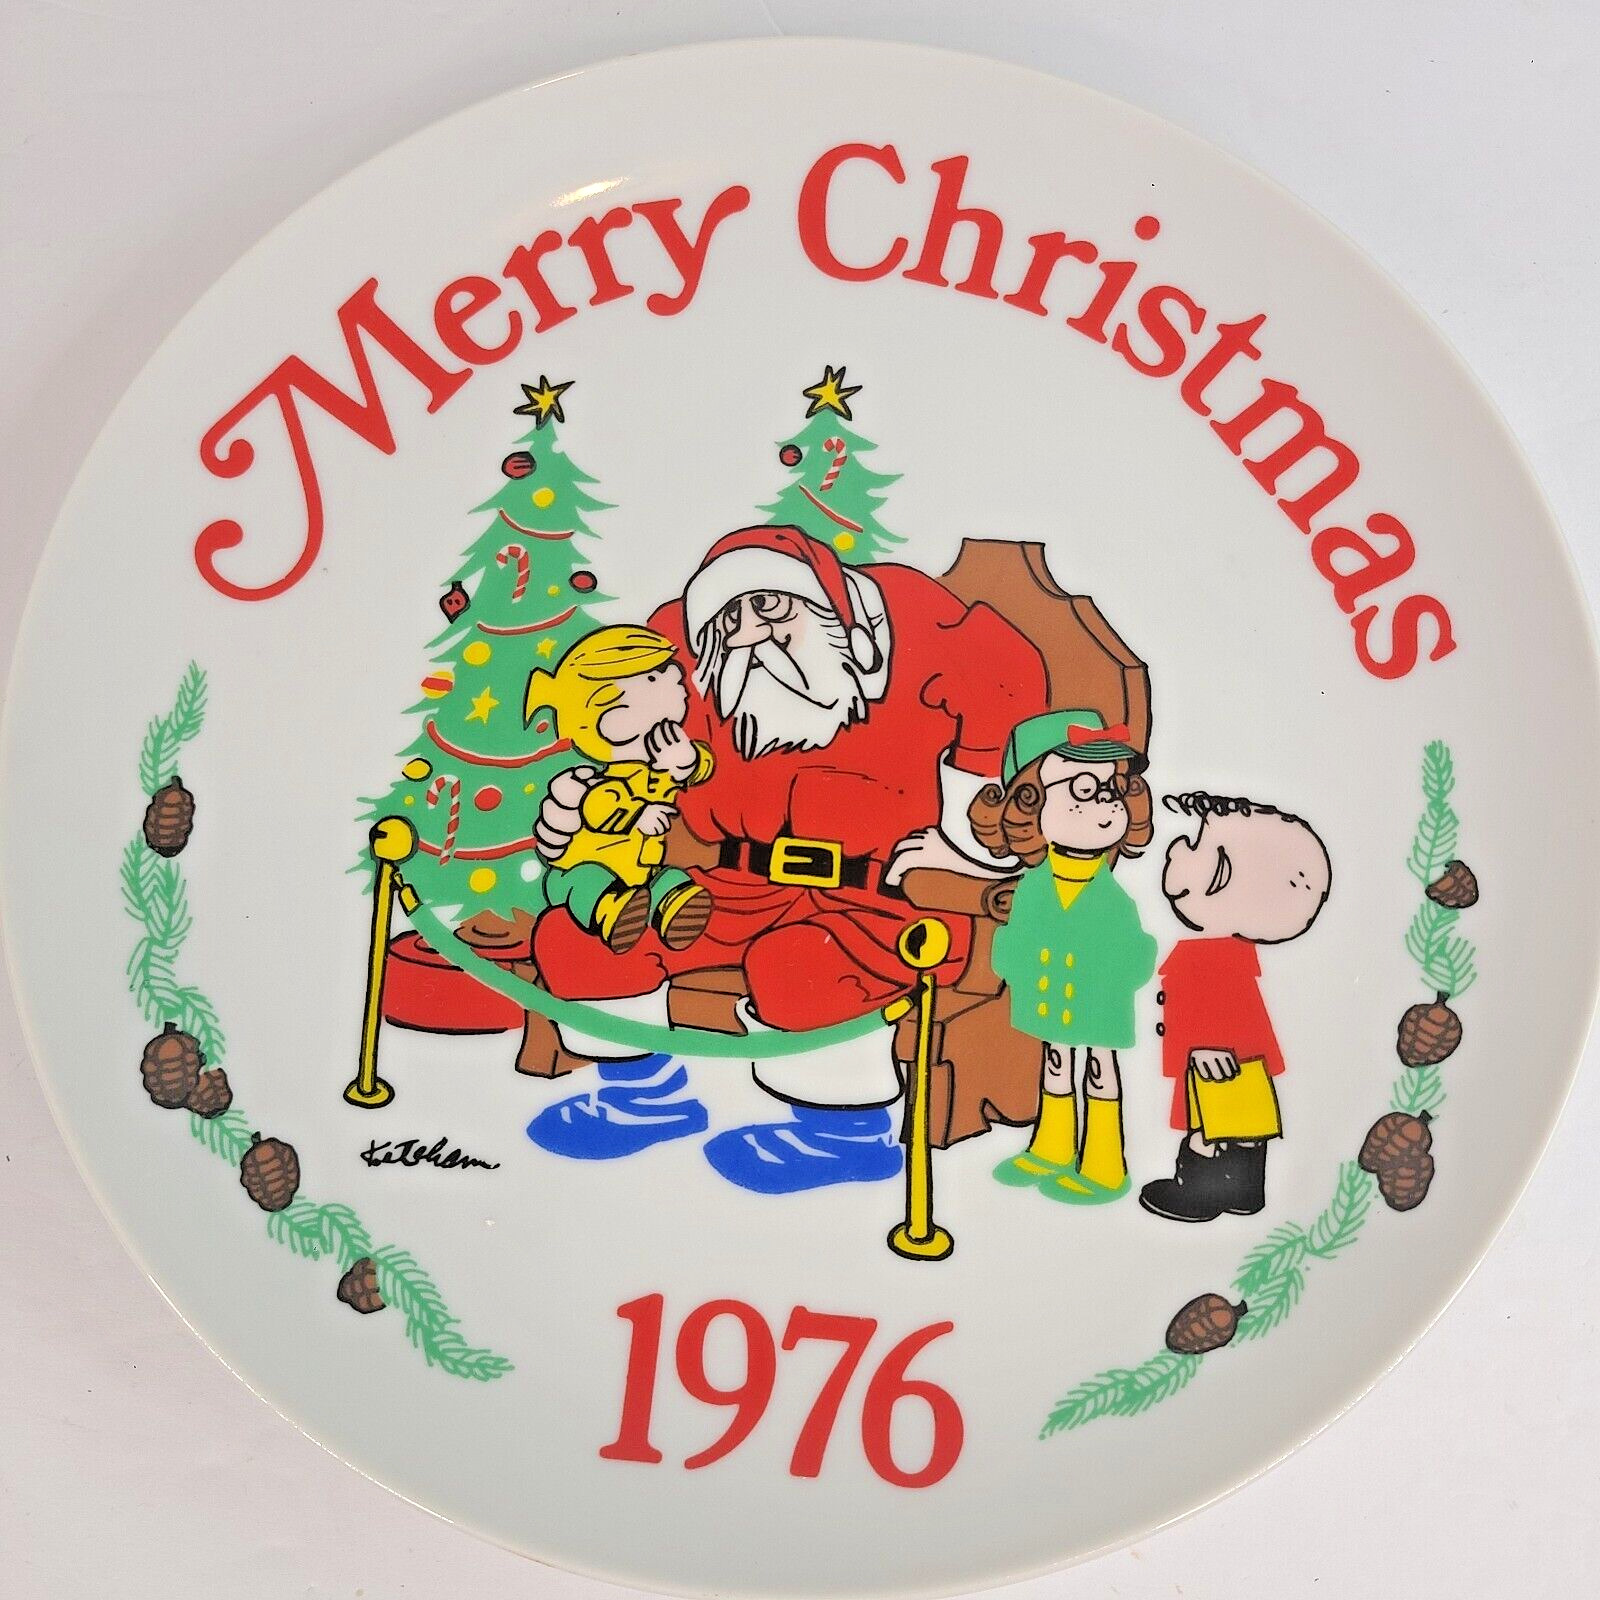 Vintage 70s Dennis the Menace Merry Christmas Plate 1976 By Hank Ketcham